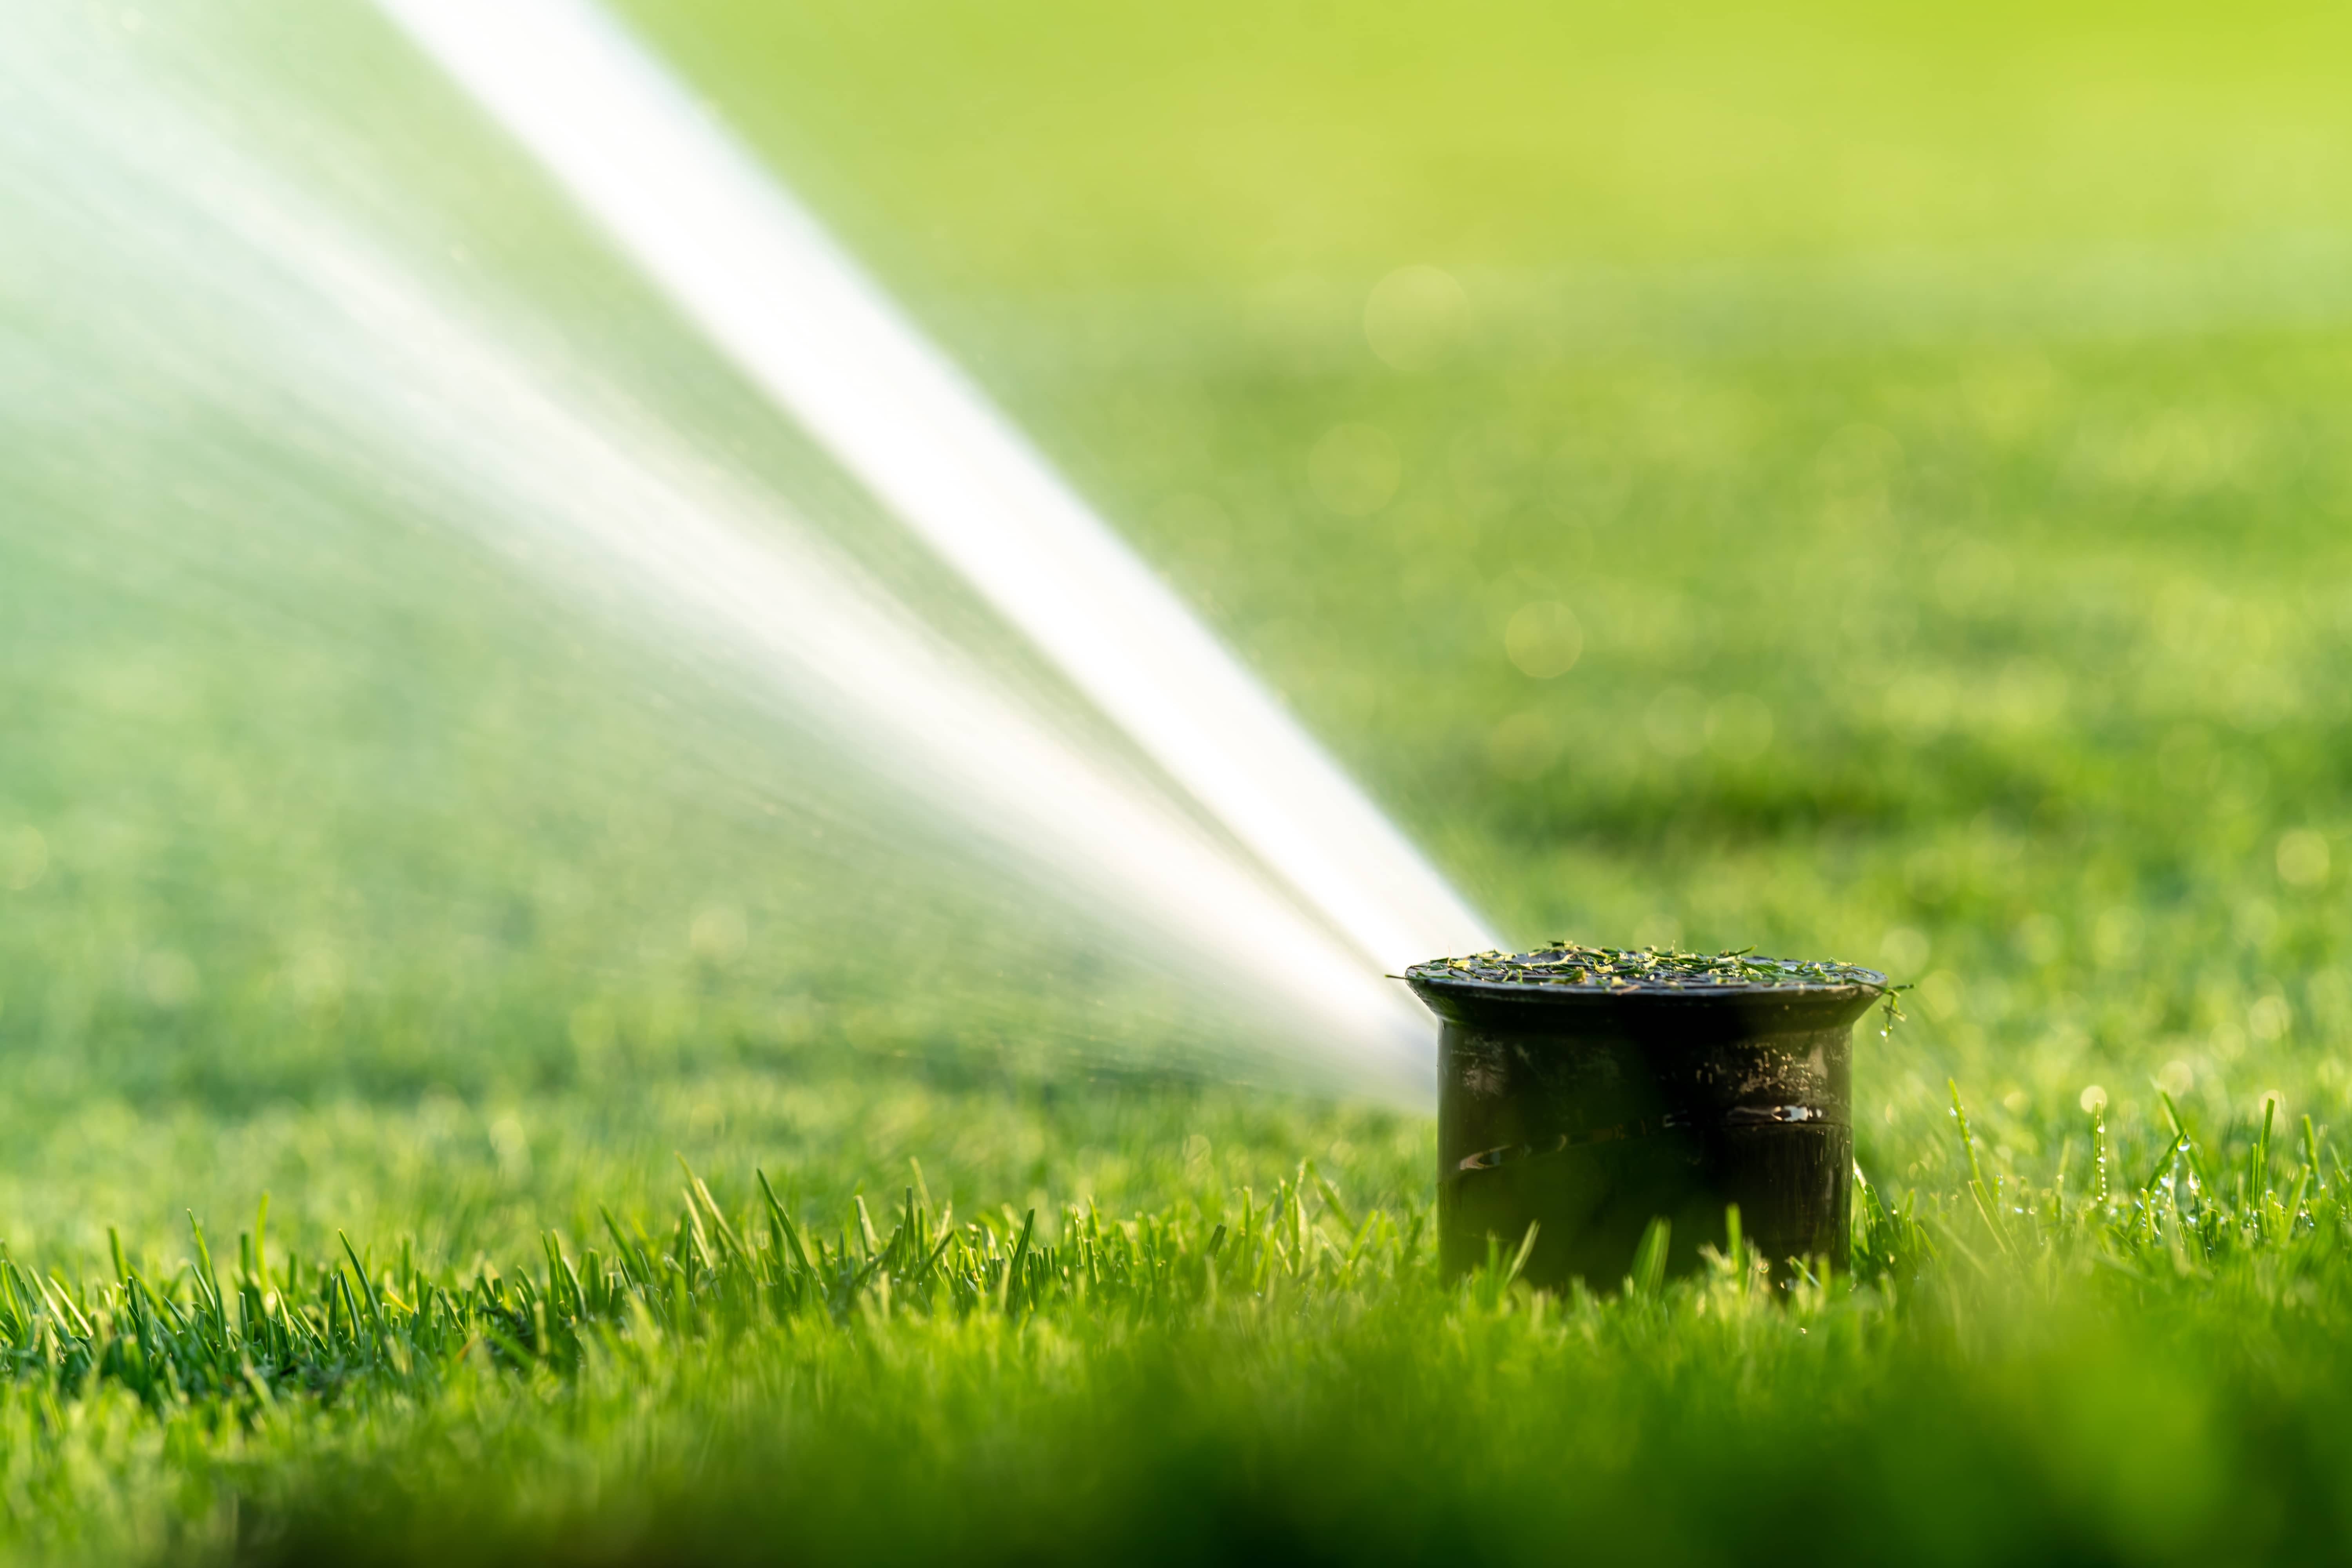 watering-the-lawns-of-sports-grounds-with-the-help-of-automatic-spray-systems